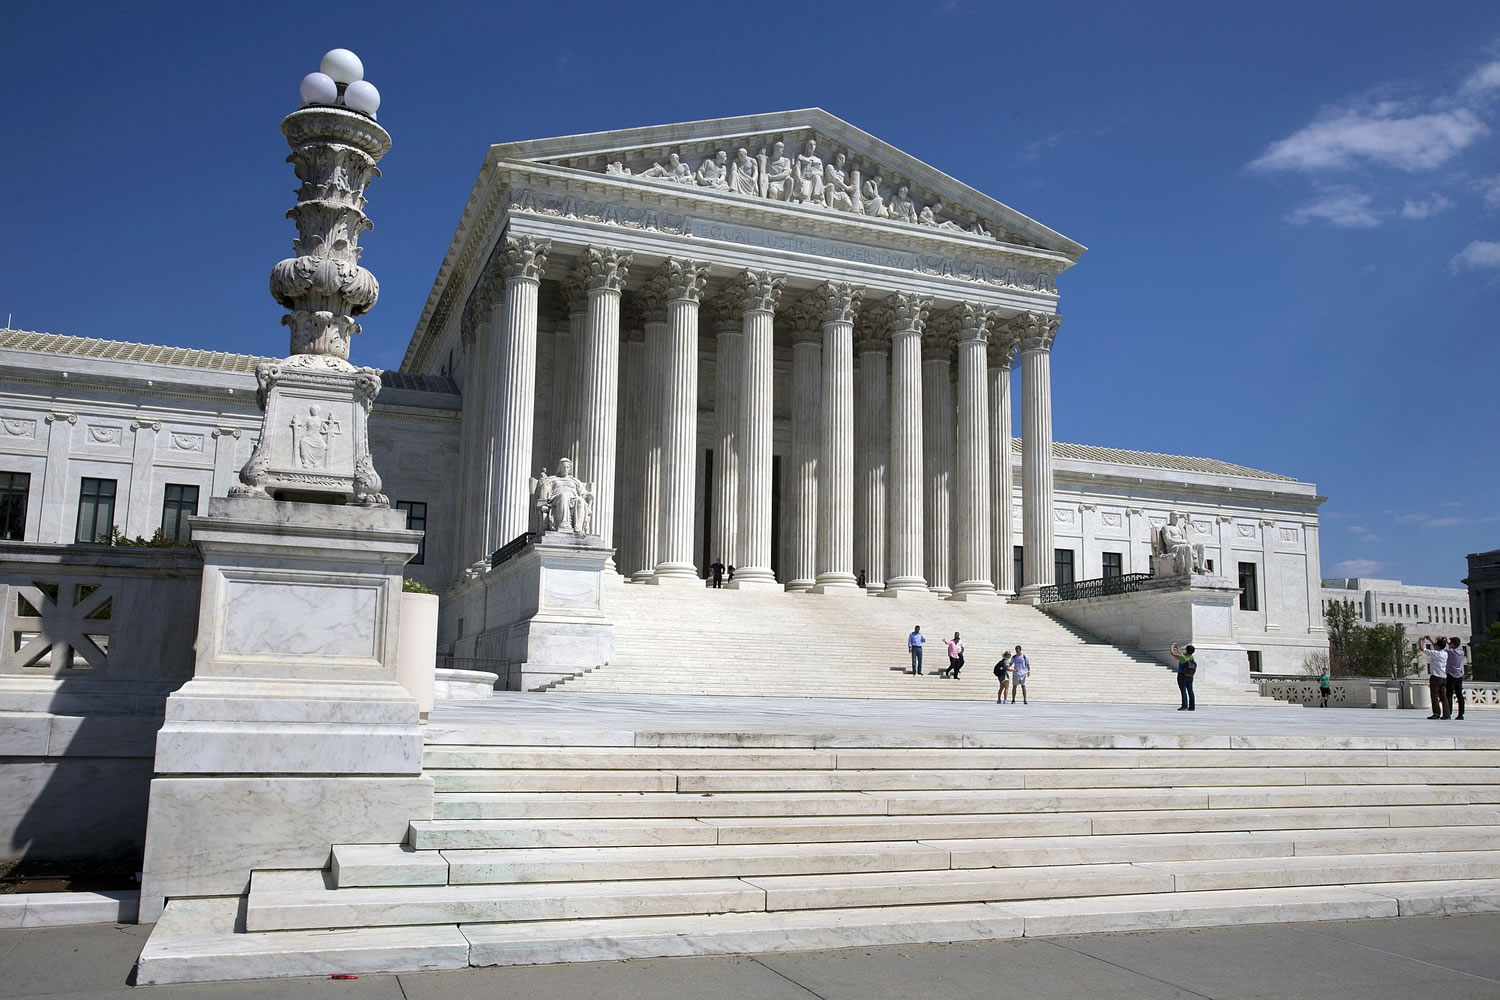 Associated Press files
People walk on the steps of the Supreme Court in Washington in April. The court announced Thursday the new cases it would consider during its 2014-15 term.